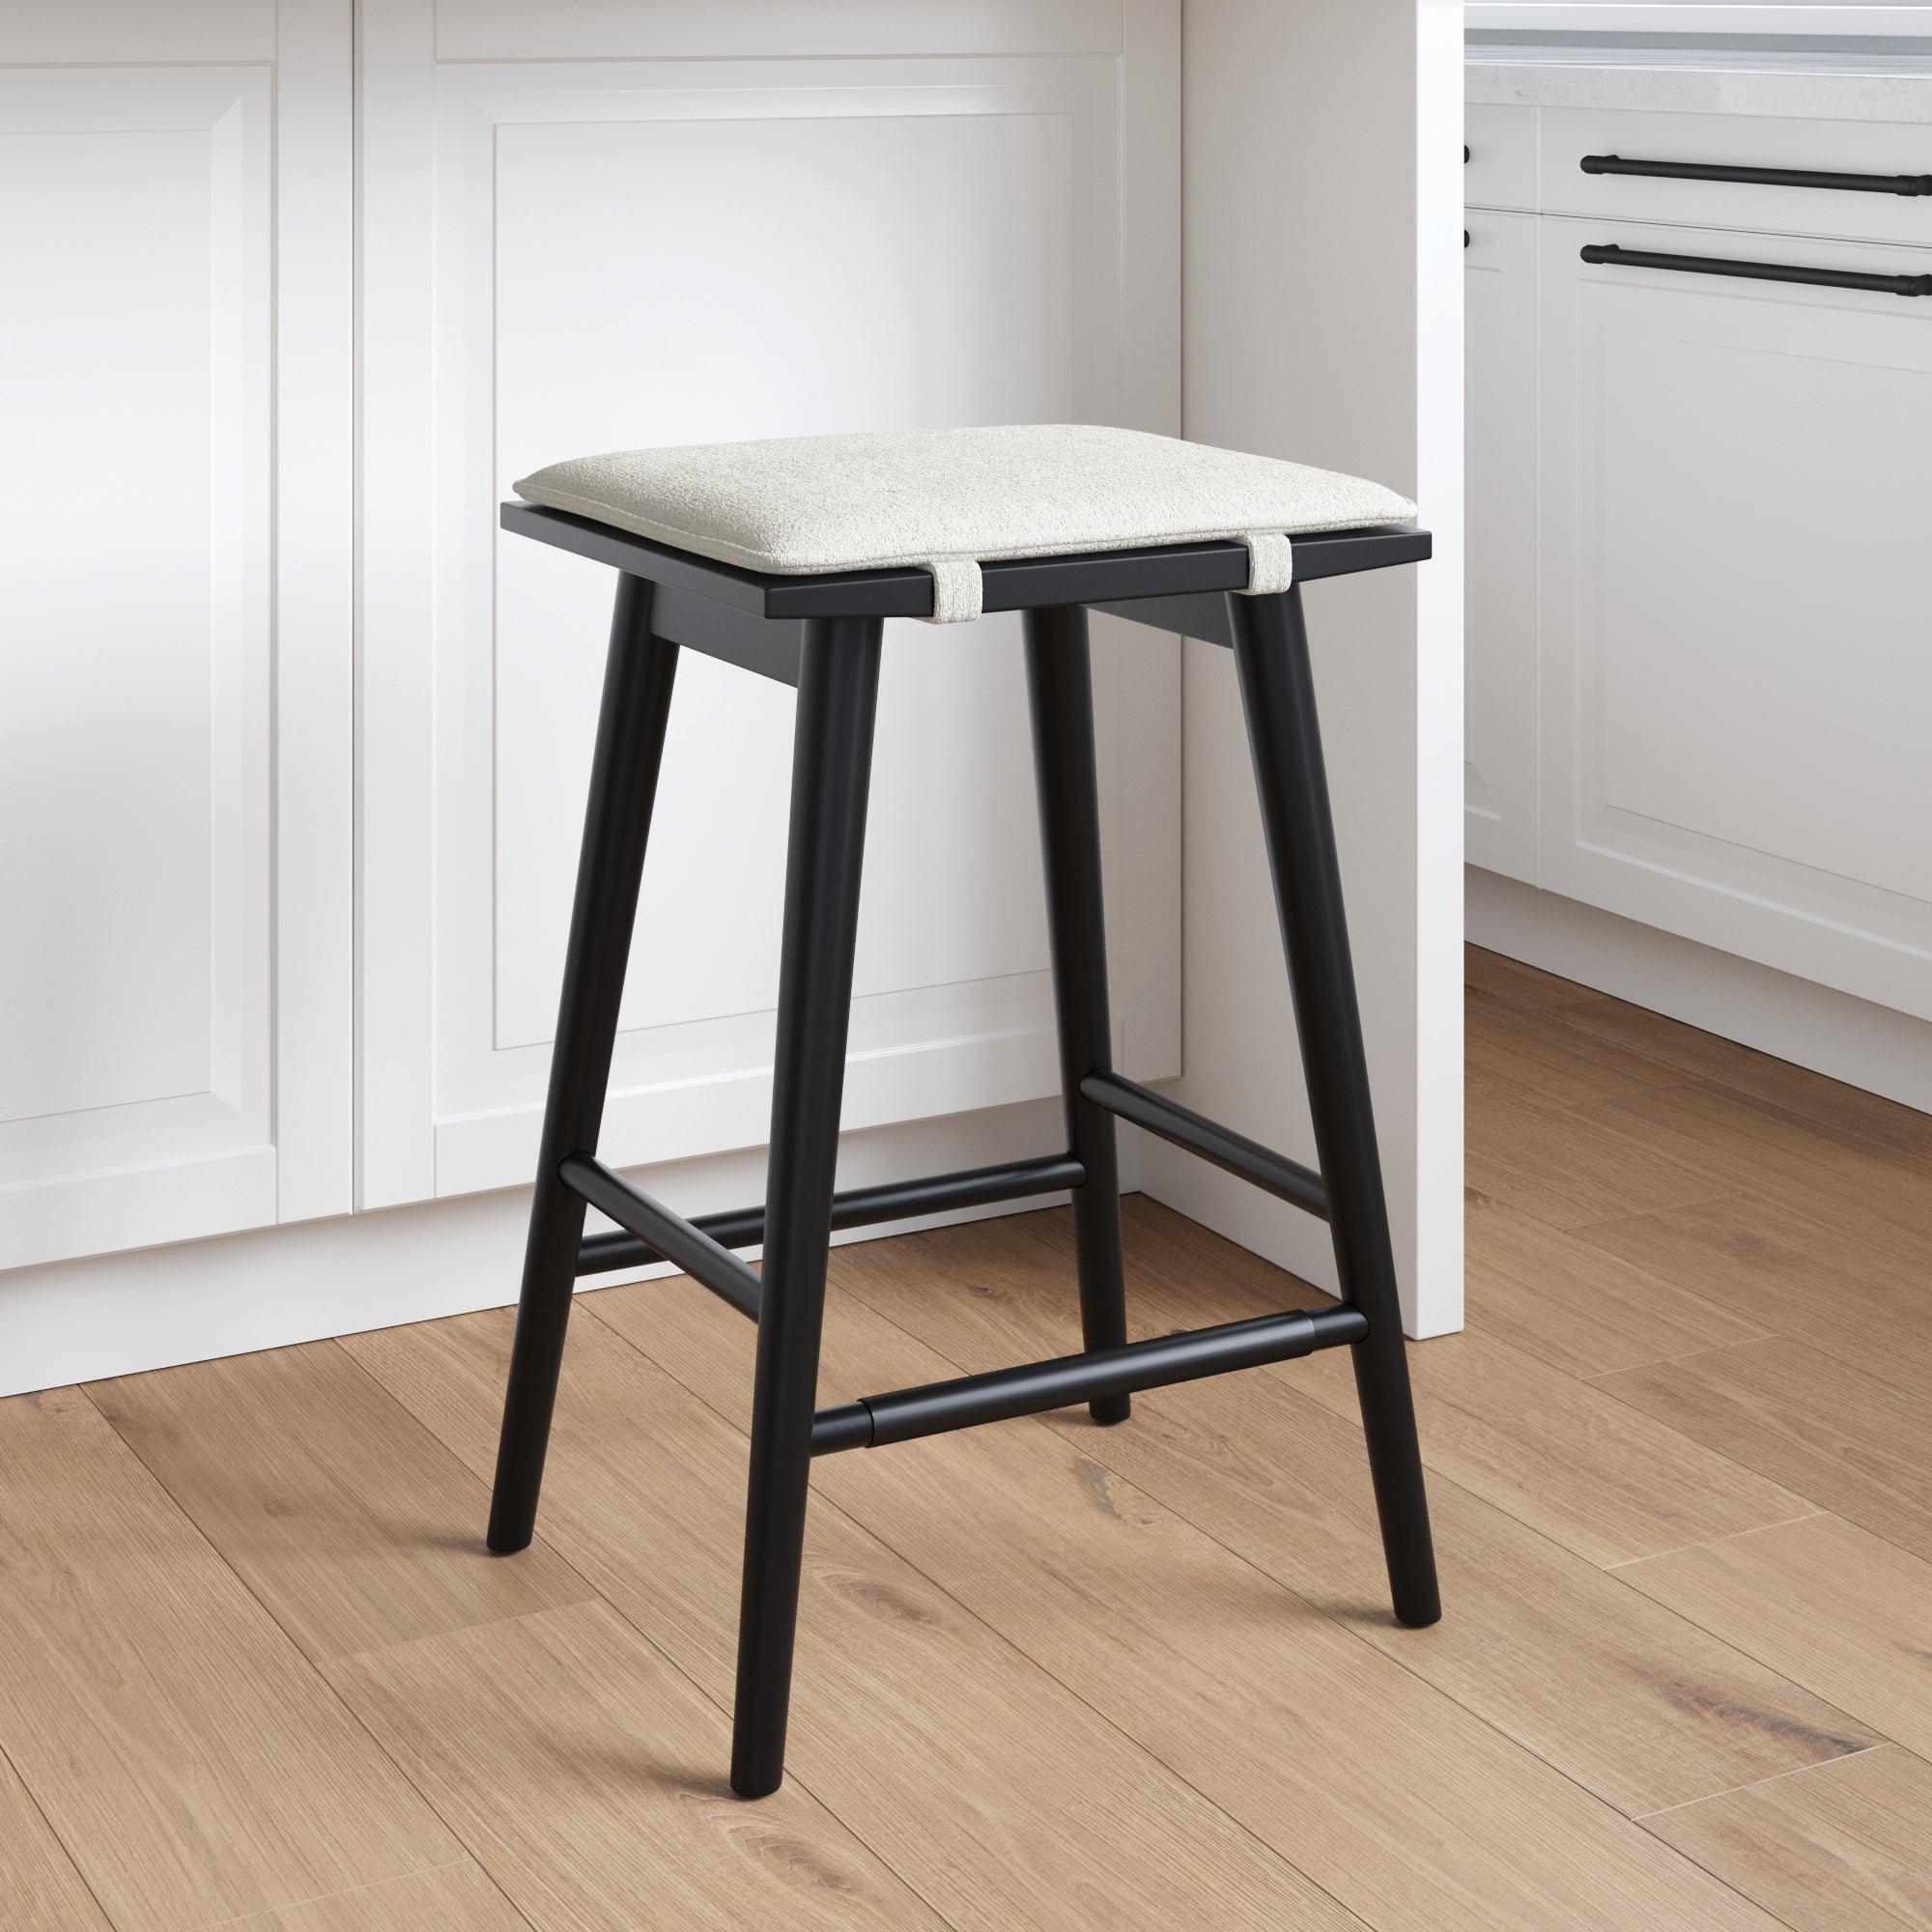 Wood Cushioned Counter Height Bar Stool Brown